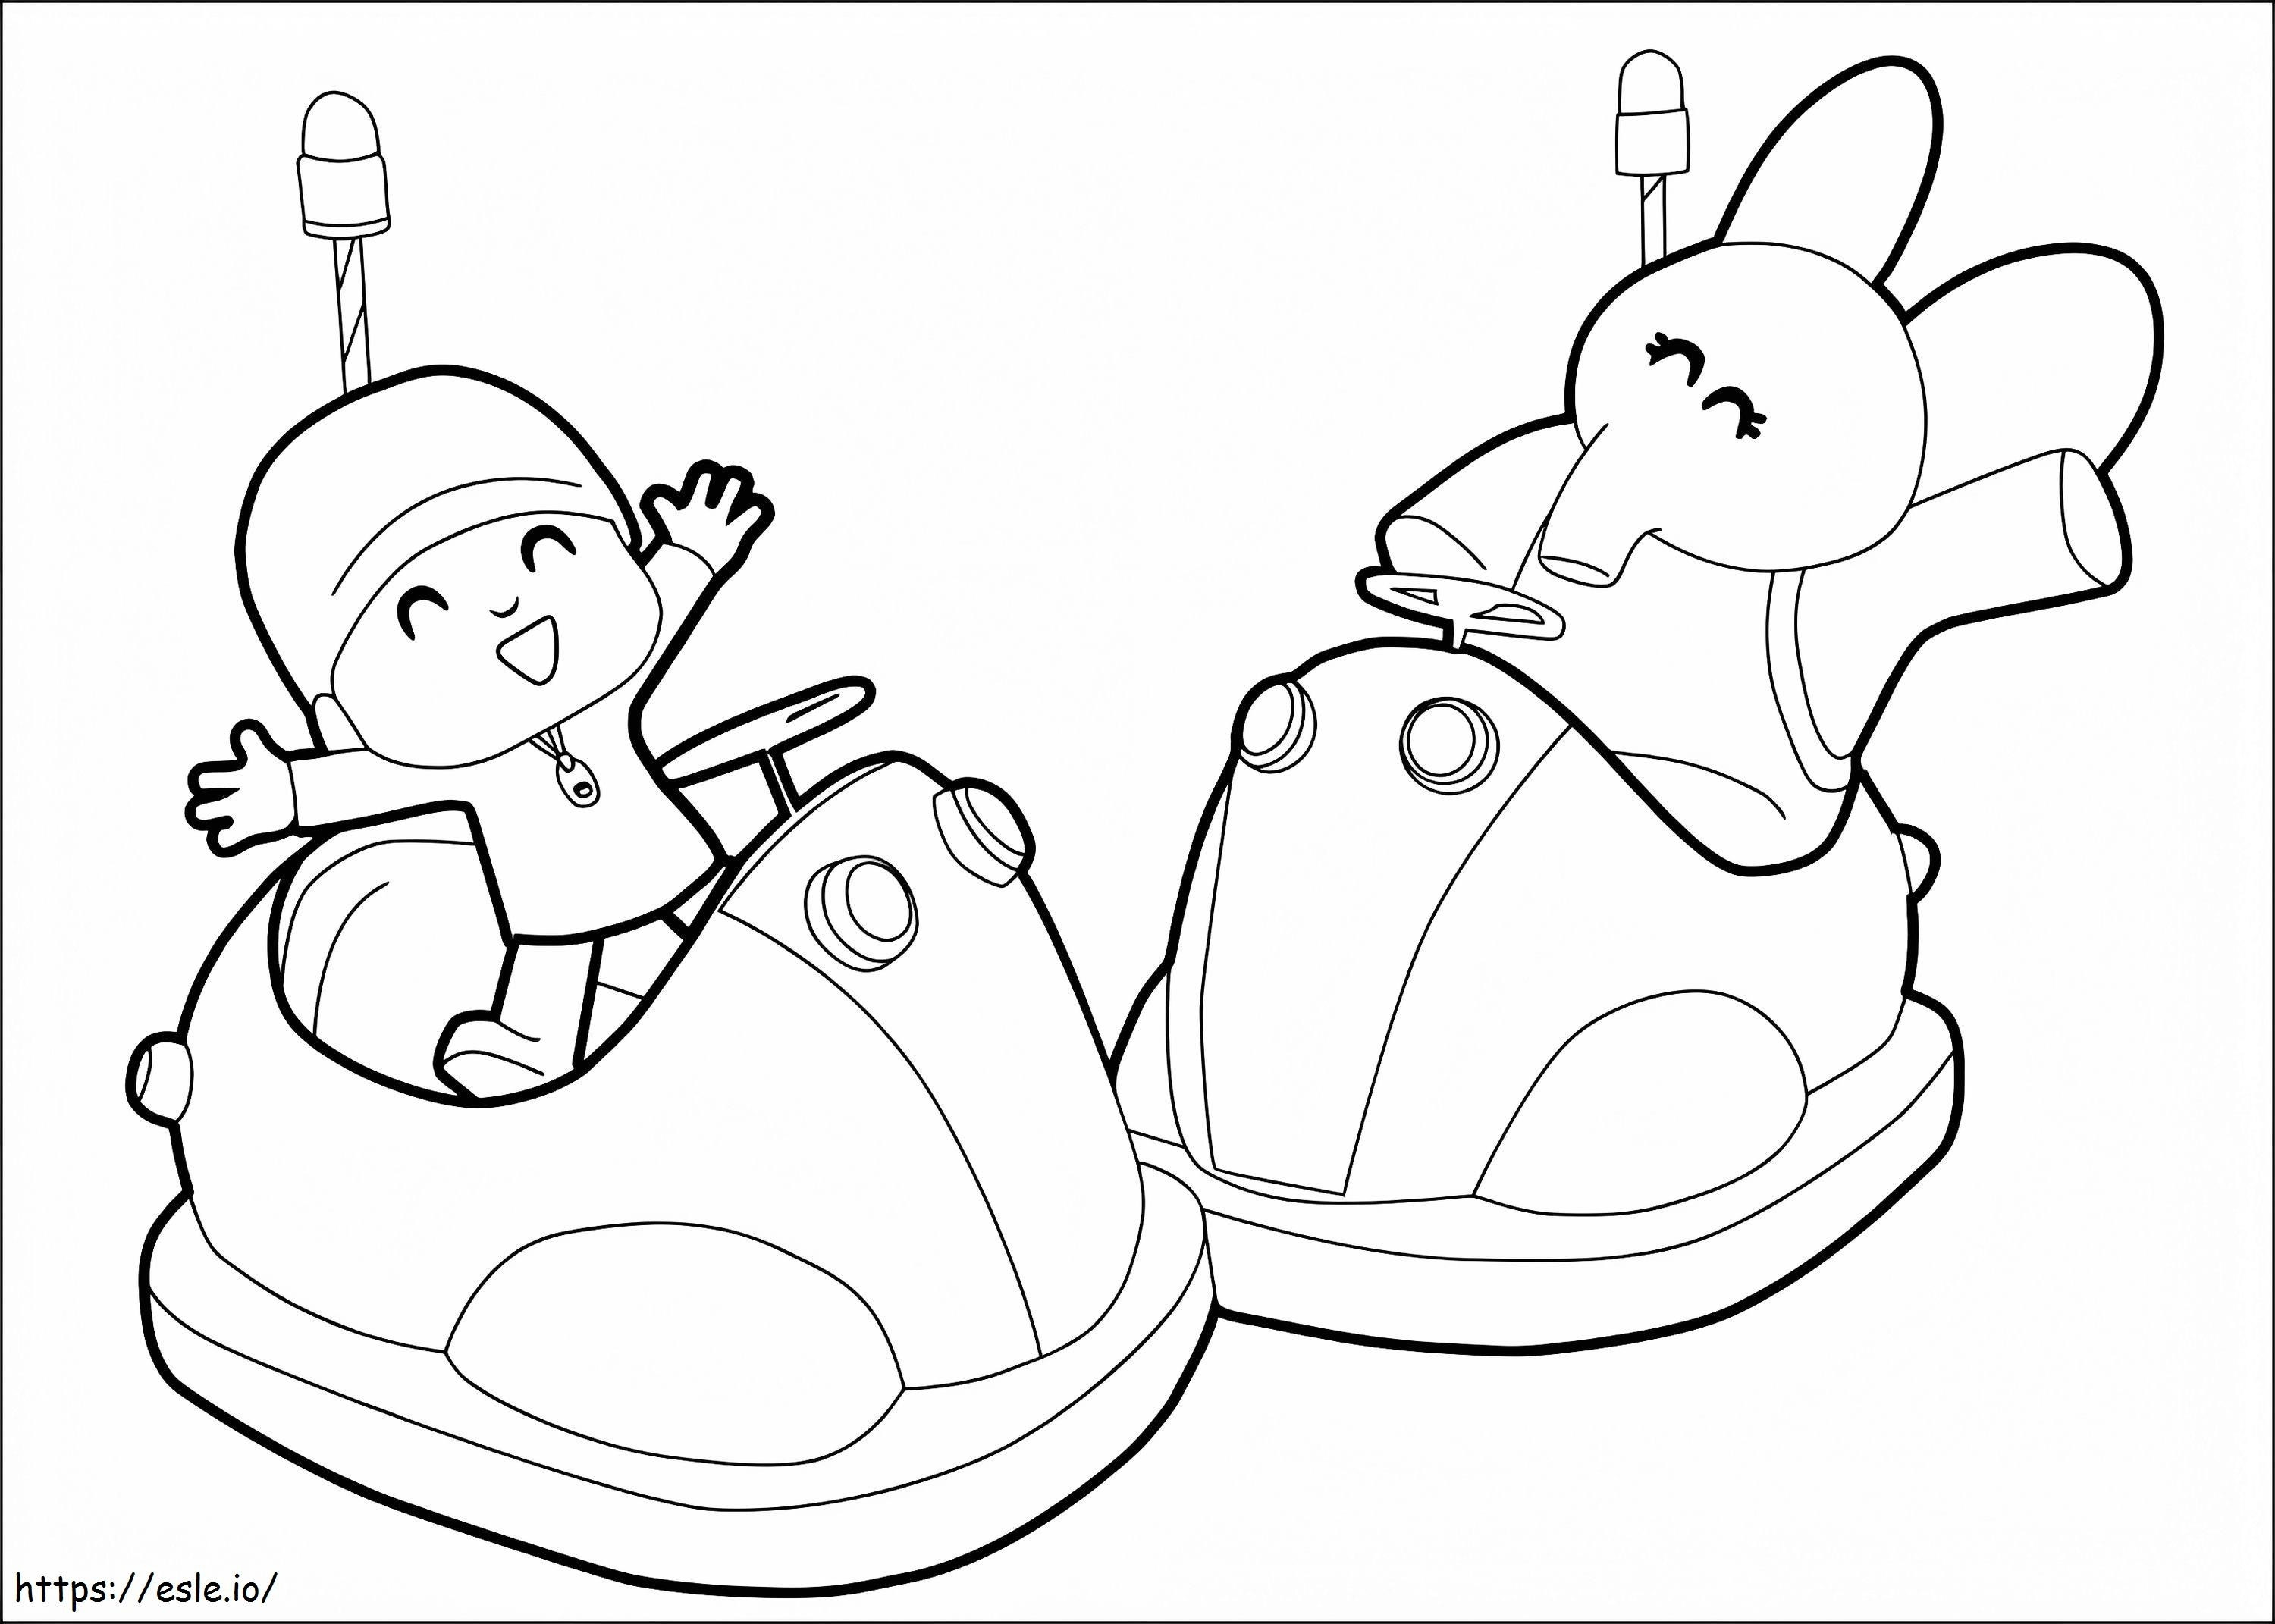 Pocoyo And Elly coloring page